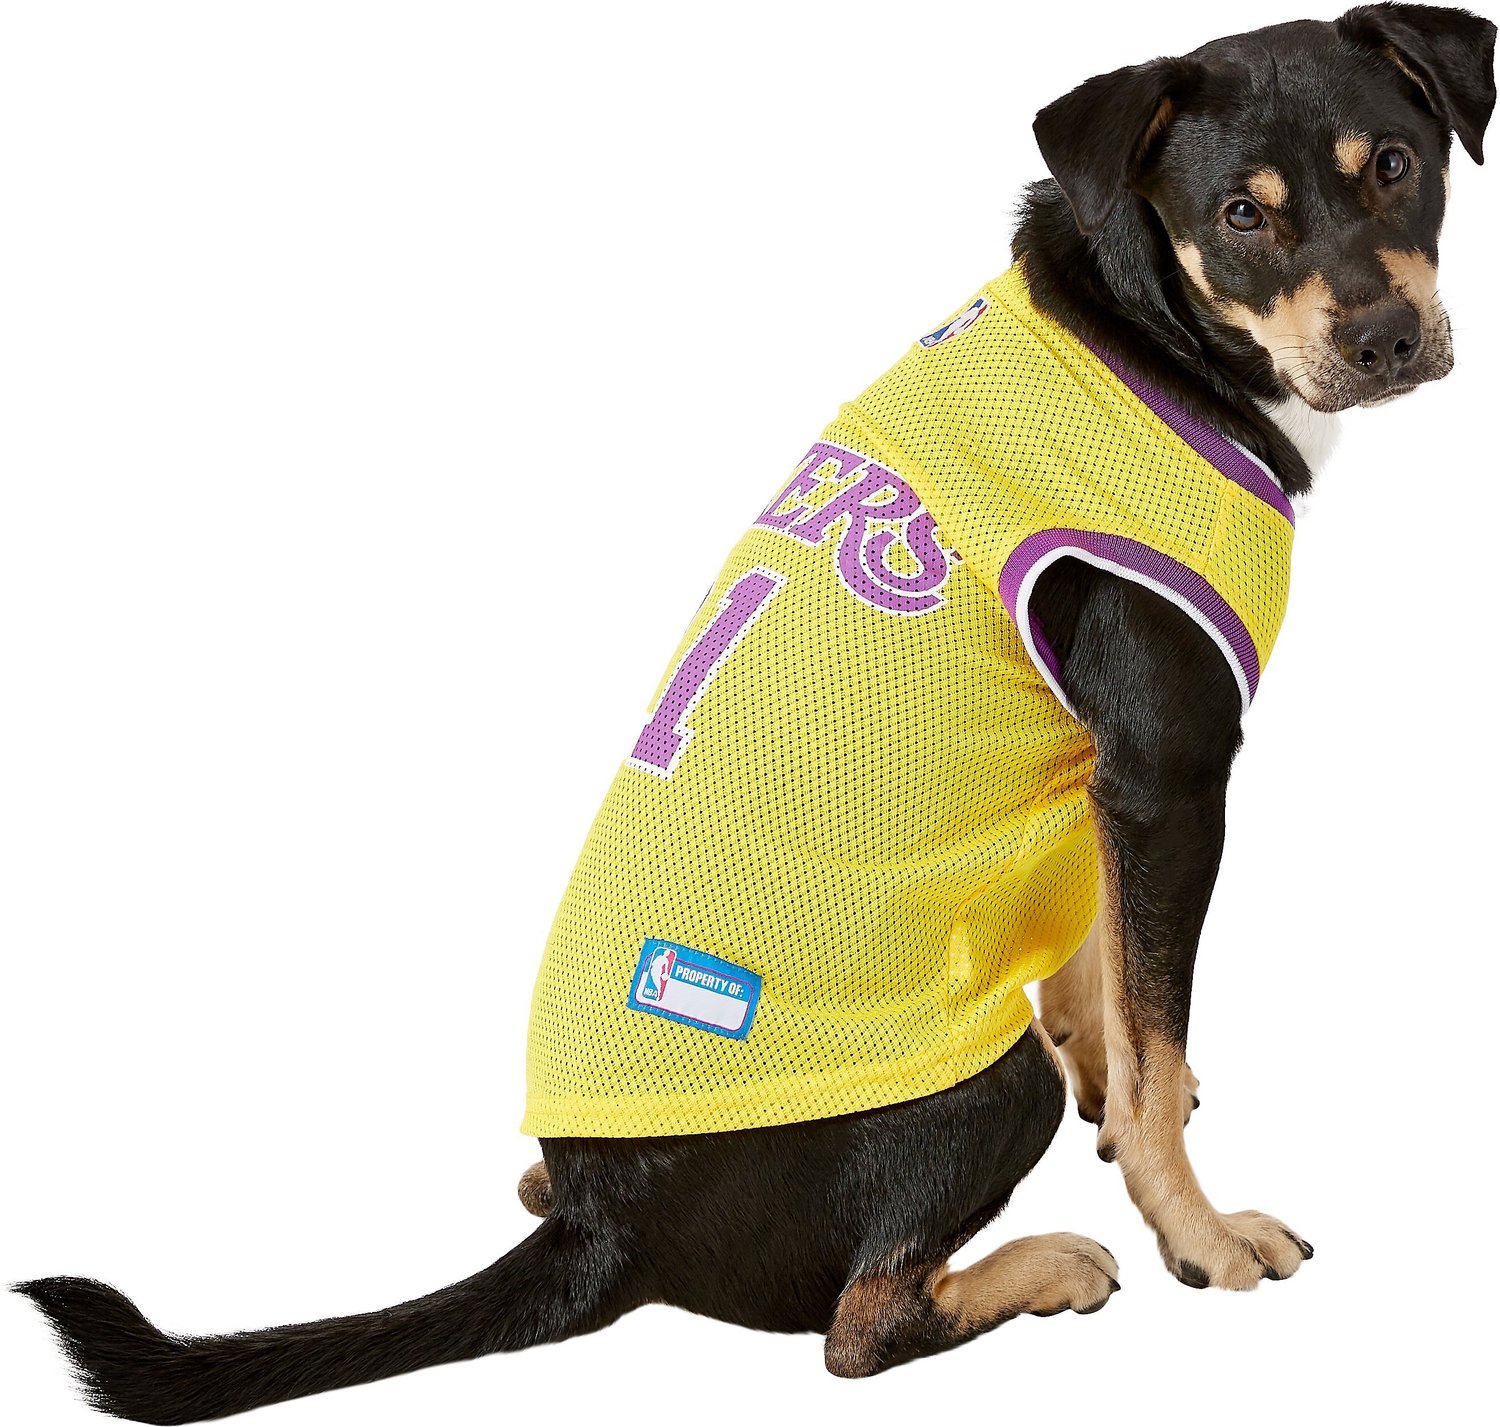 PETS FIRST NBA Dog & Cat Mesh Jersey, LA Lakers, Large - Chewy.com